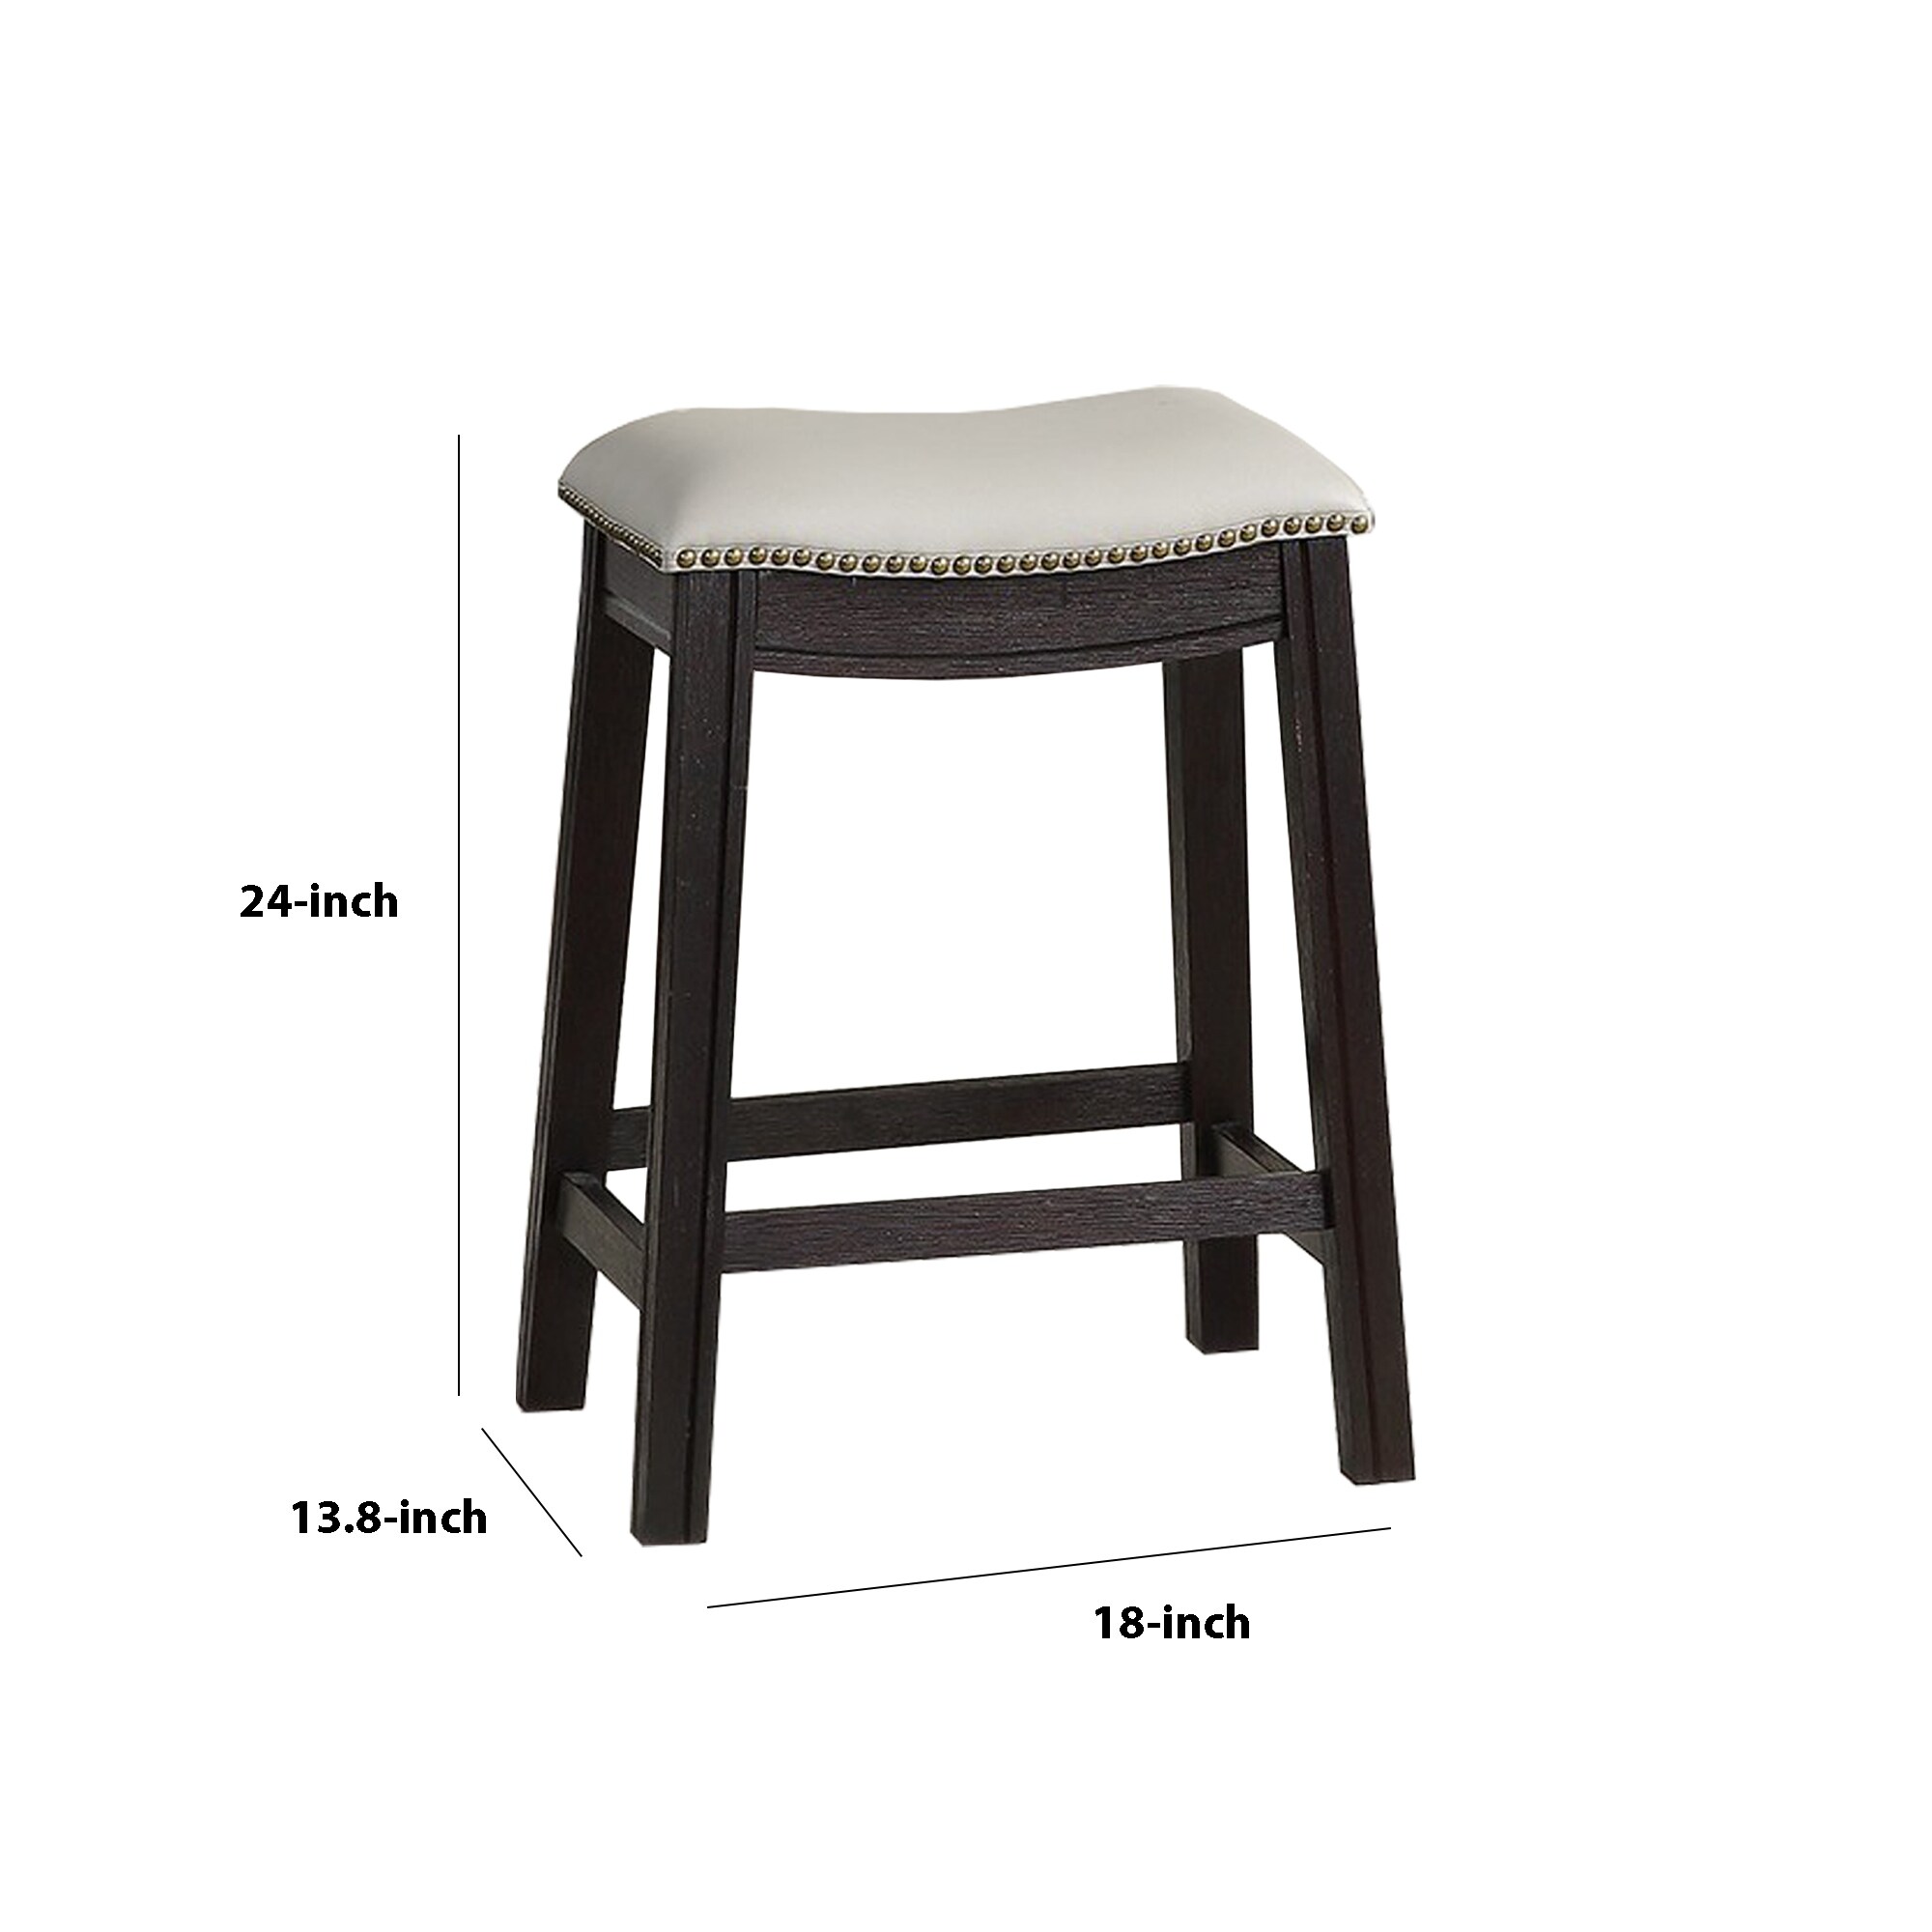 Curved Leatherette Counter Stool with Nailhead Trim, Set of 2, Gray